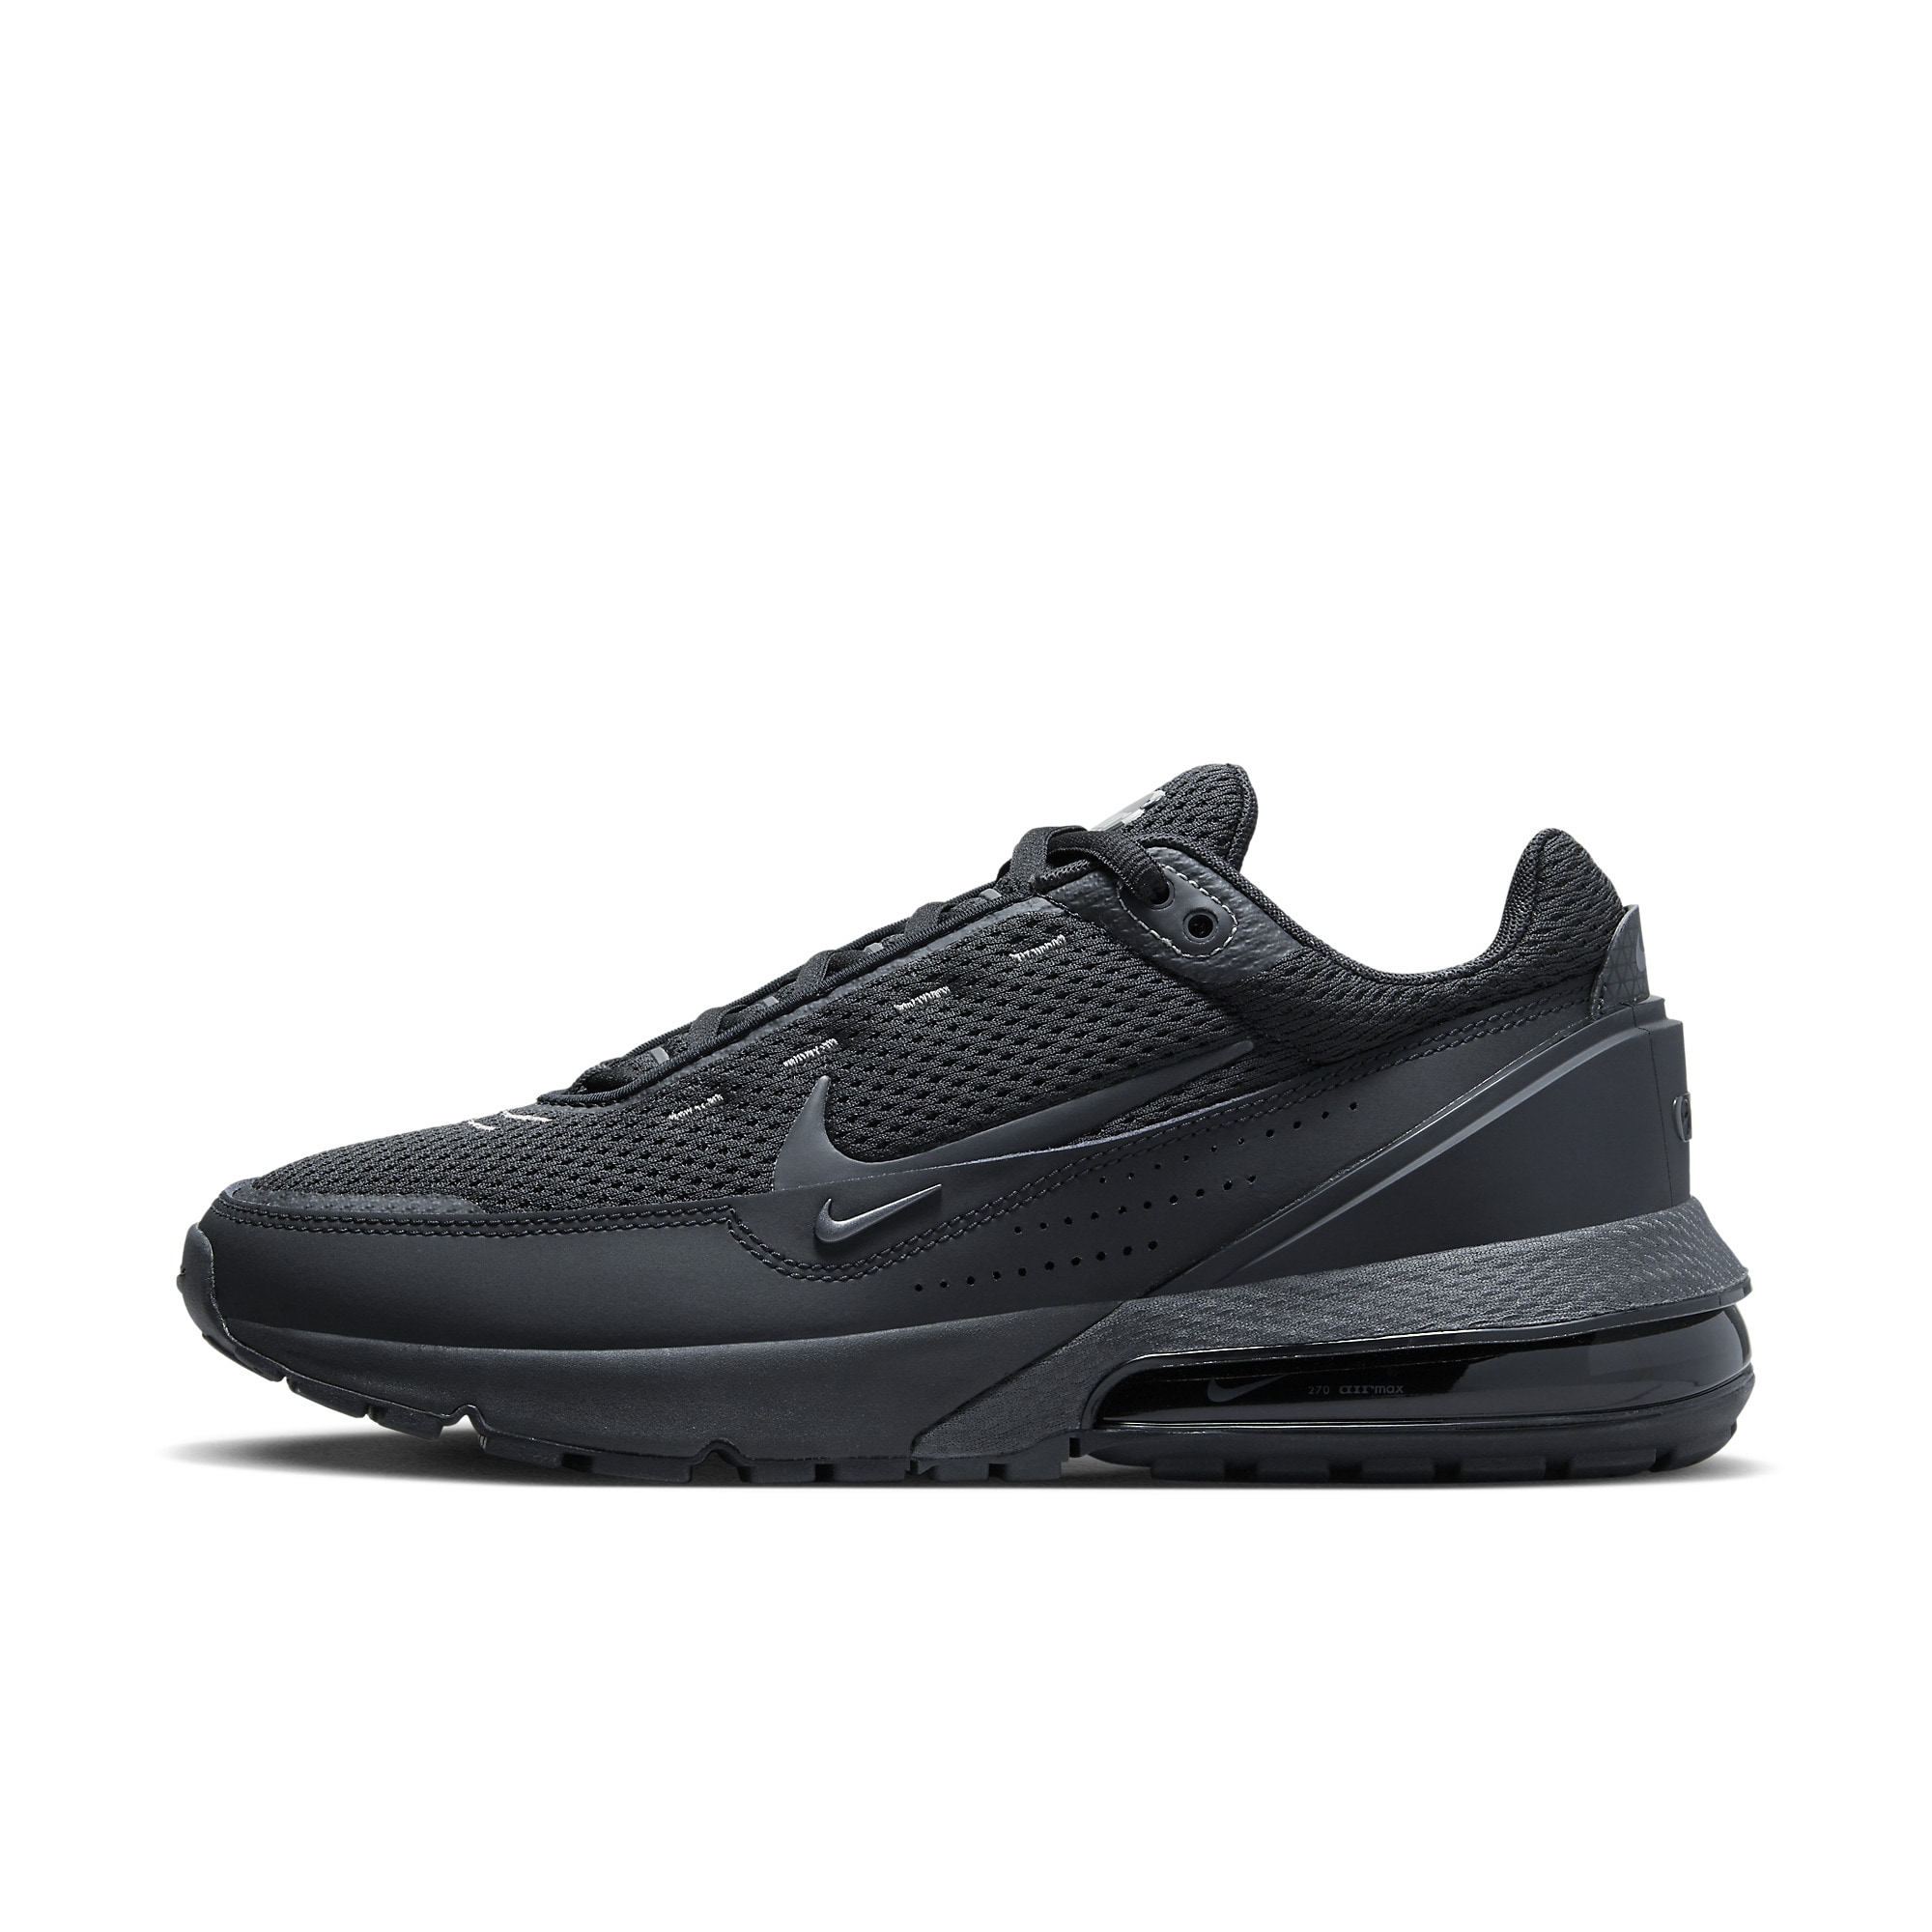 Nike Sportswear Air Max Pulse - Black/Anthracite | Pro:Direct Soccer